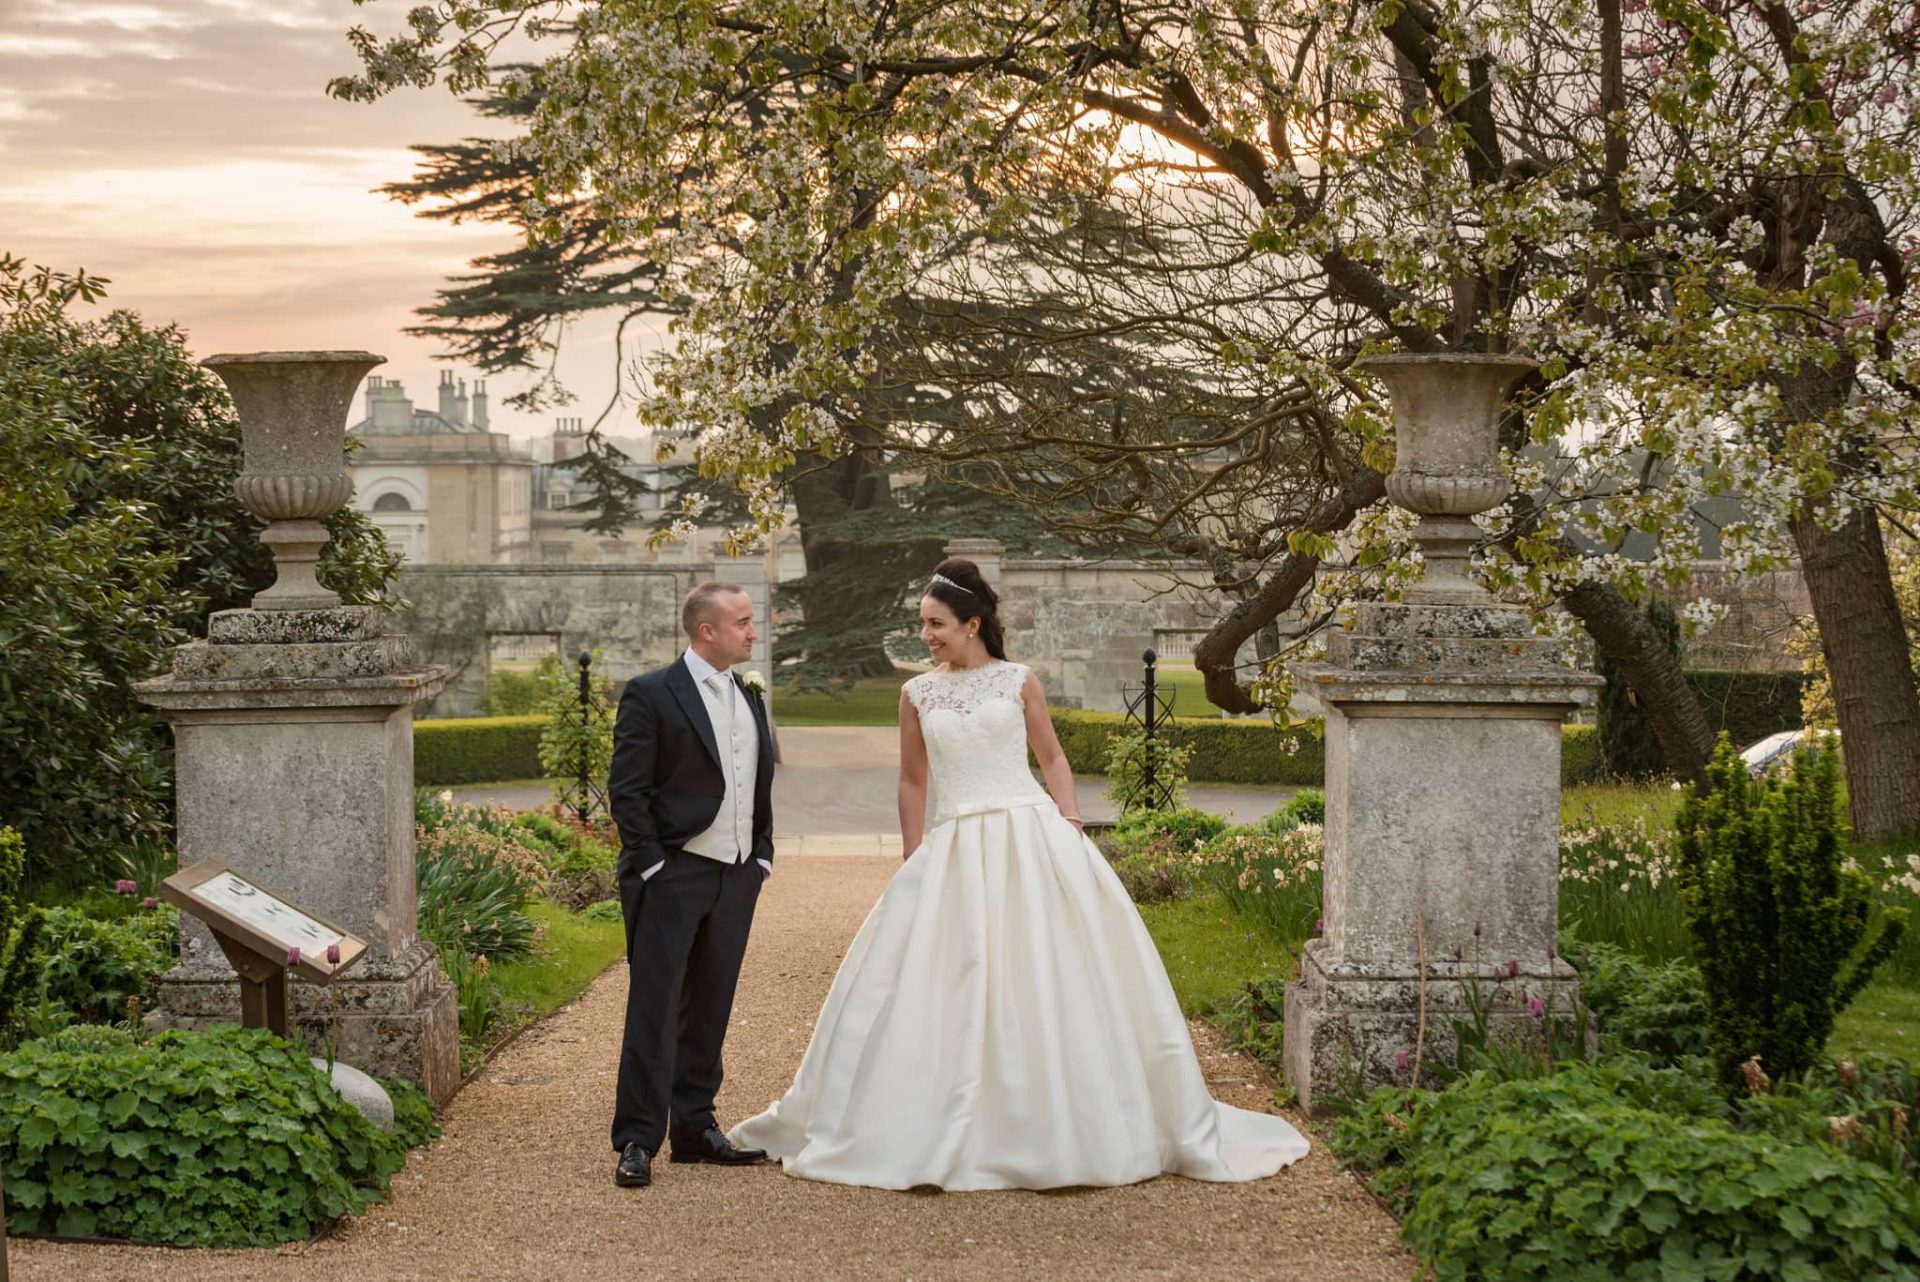 Bride and groom in gardens at Woburn Abbey